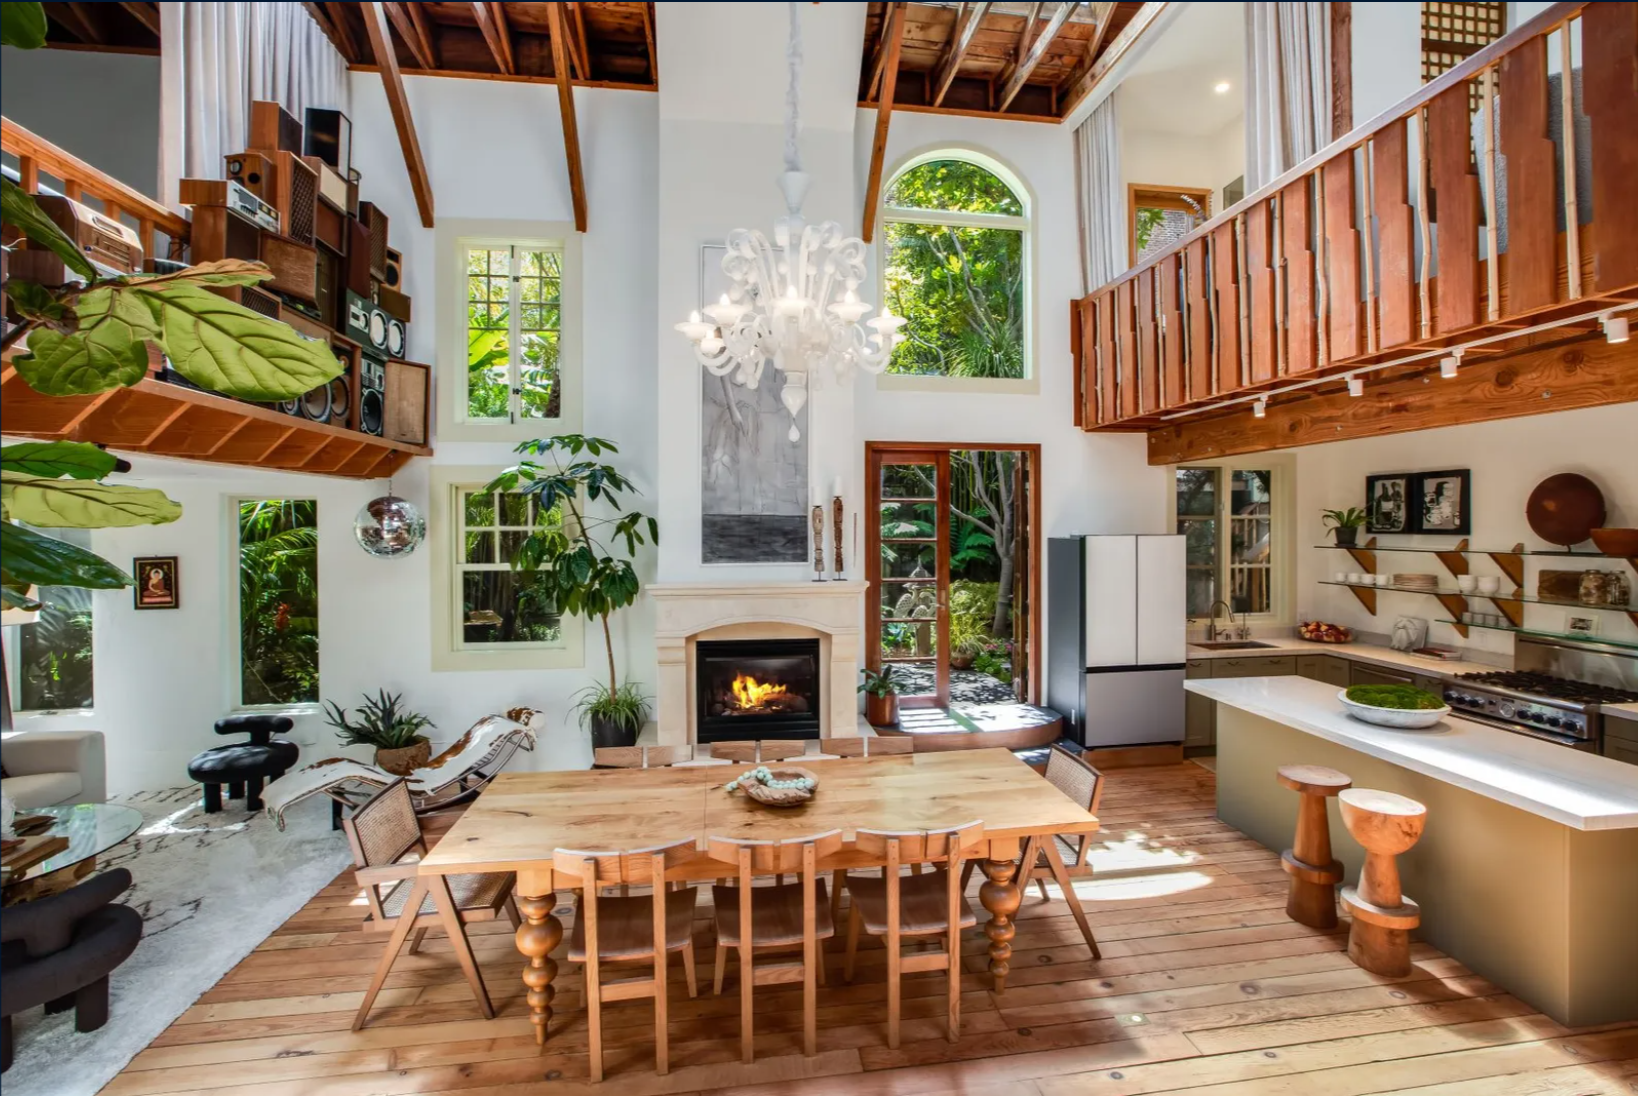 See the Lush Backyard of This Old San Francisco Bathhouse on Sale for $4.8M